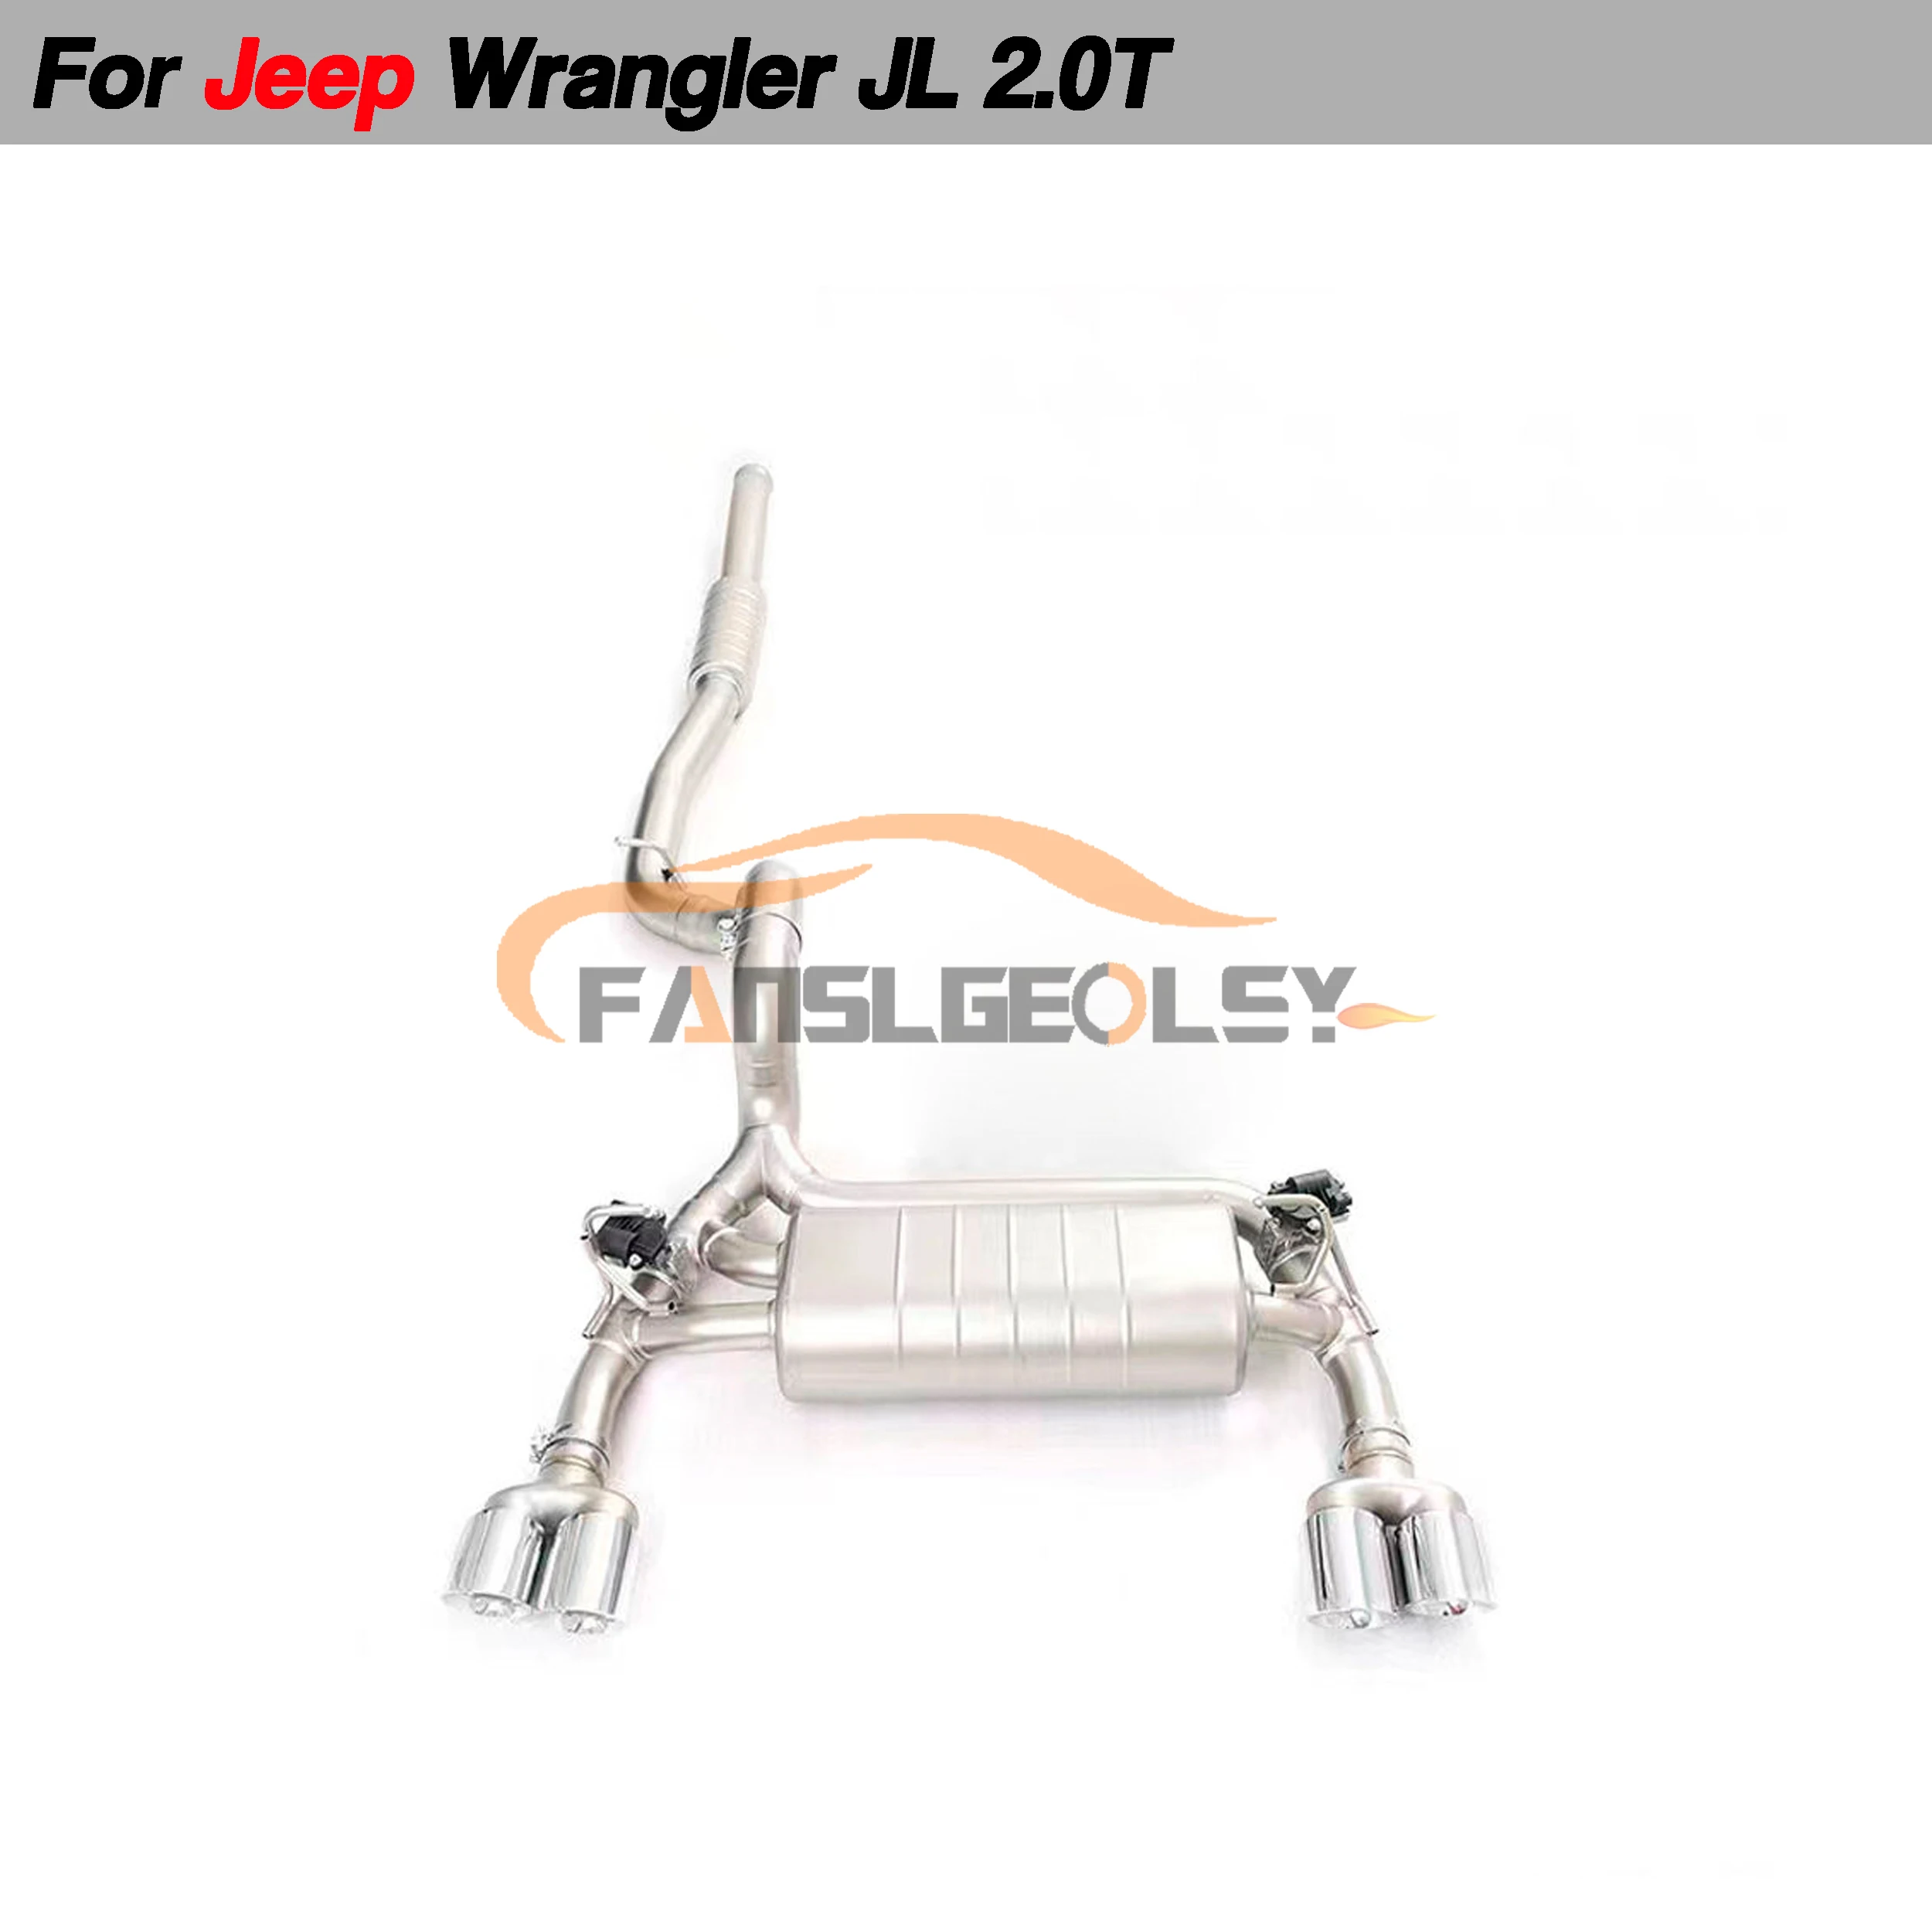 

For Jeep Wrangler JL 2.0T Stainless Performance Catback Exhaust System Valve With Muffler Pipes Tuning exhaust assembly